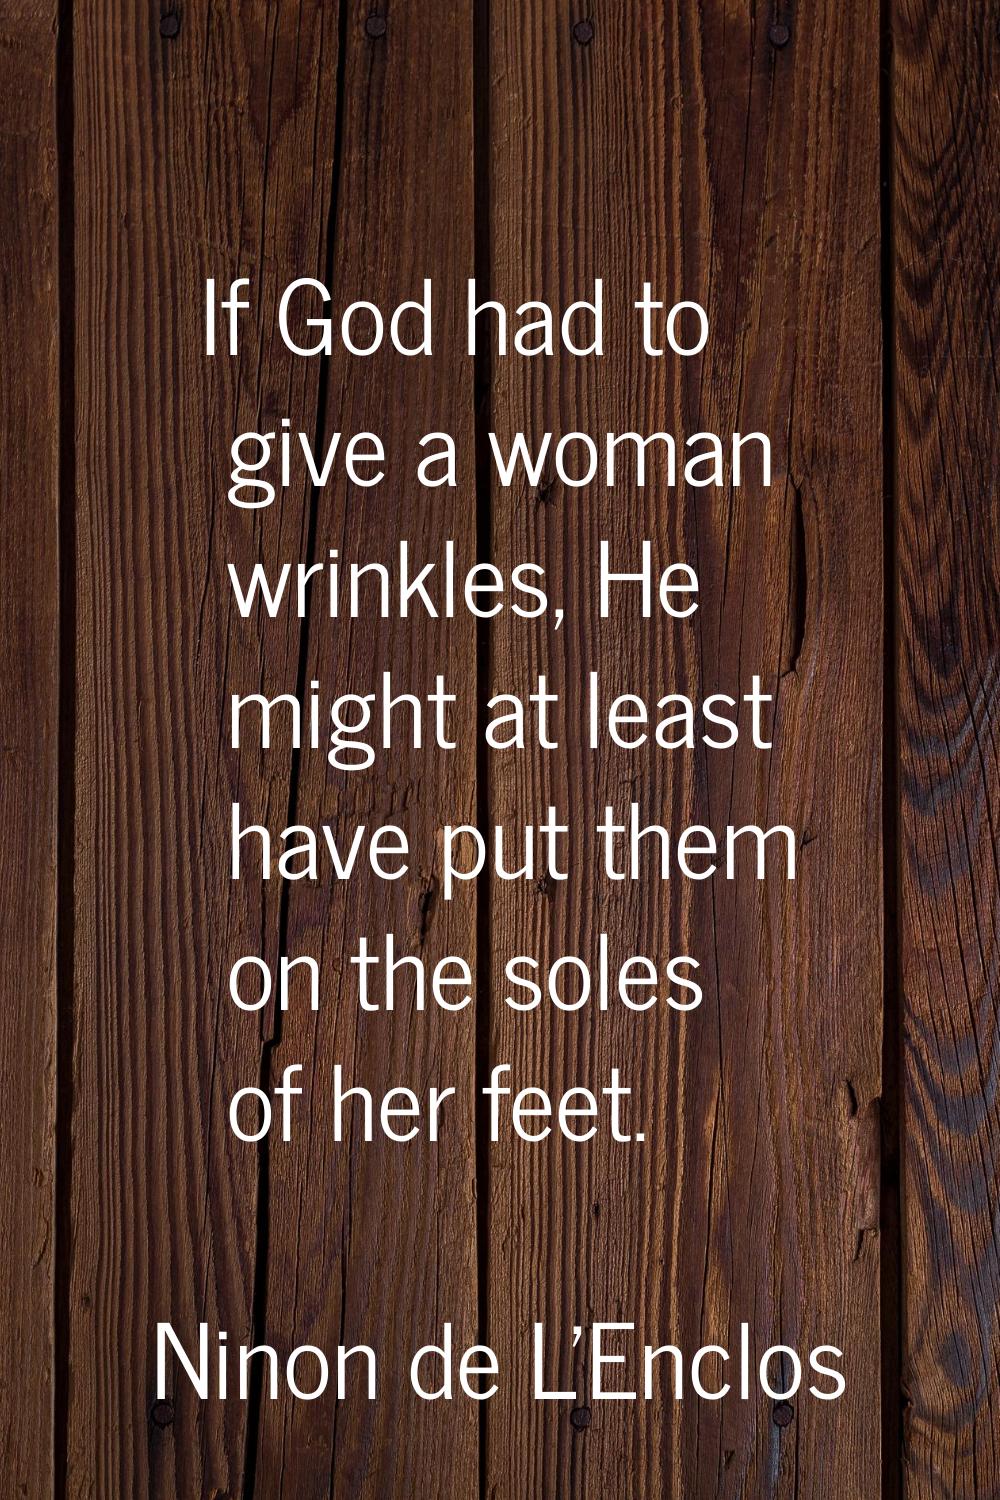 If God had to give a woman wrinkles, He might at least have put them on the soles of her feet.